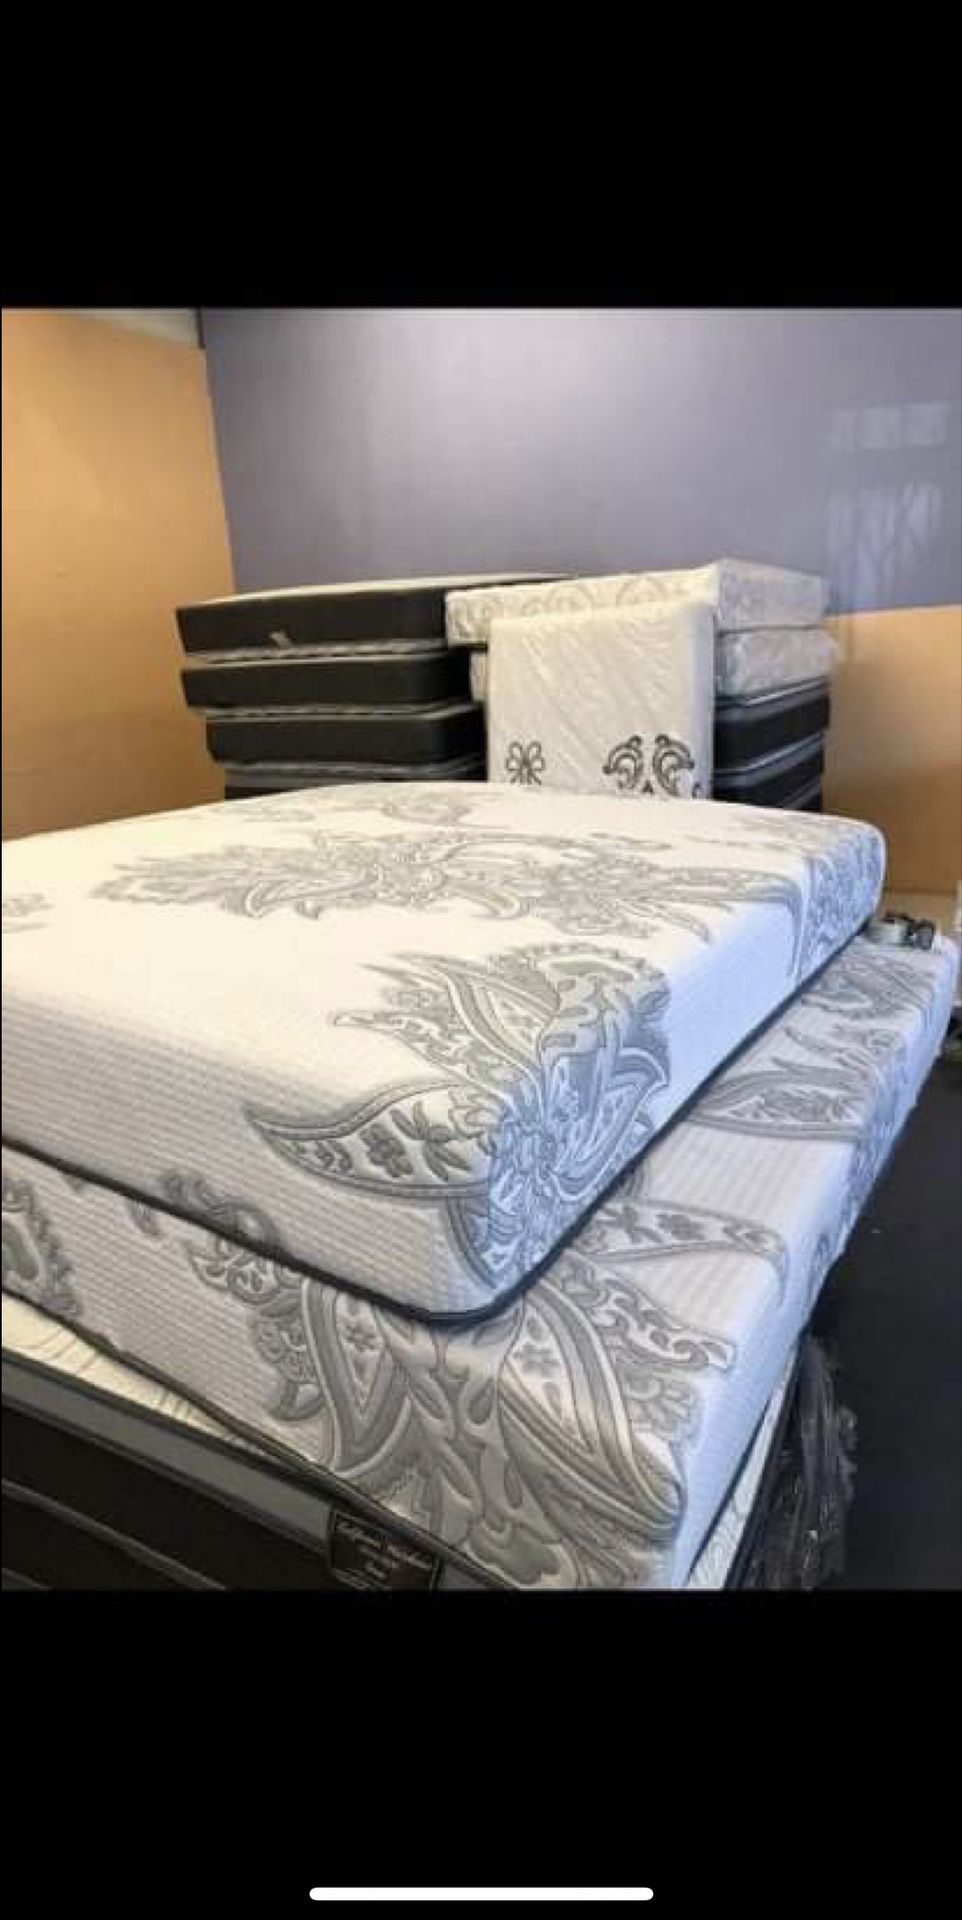 🔥BRAND NEW MATTRESSES🔥 BEST PRICES IN TOWN 💰💰 GREAT QUALITY 💯 ALL SIZES AVAILABLE 🛏 MEMORY FOAM 🛏 PILLOW-TOP🛏 REGULAR🛏 WARRANTY AND FREE LOCA